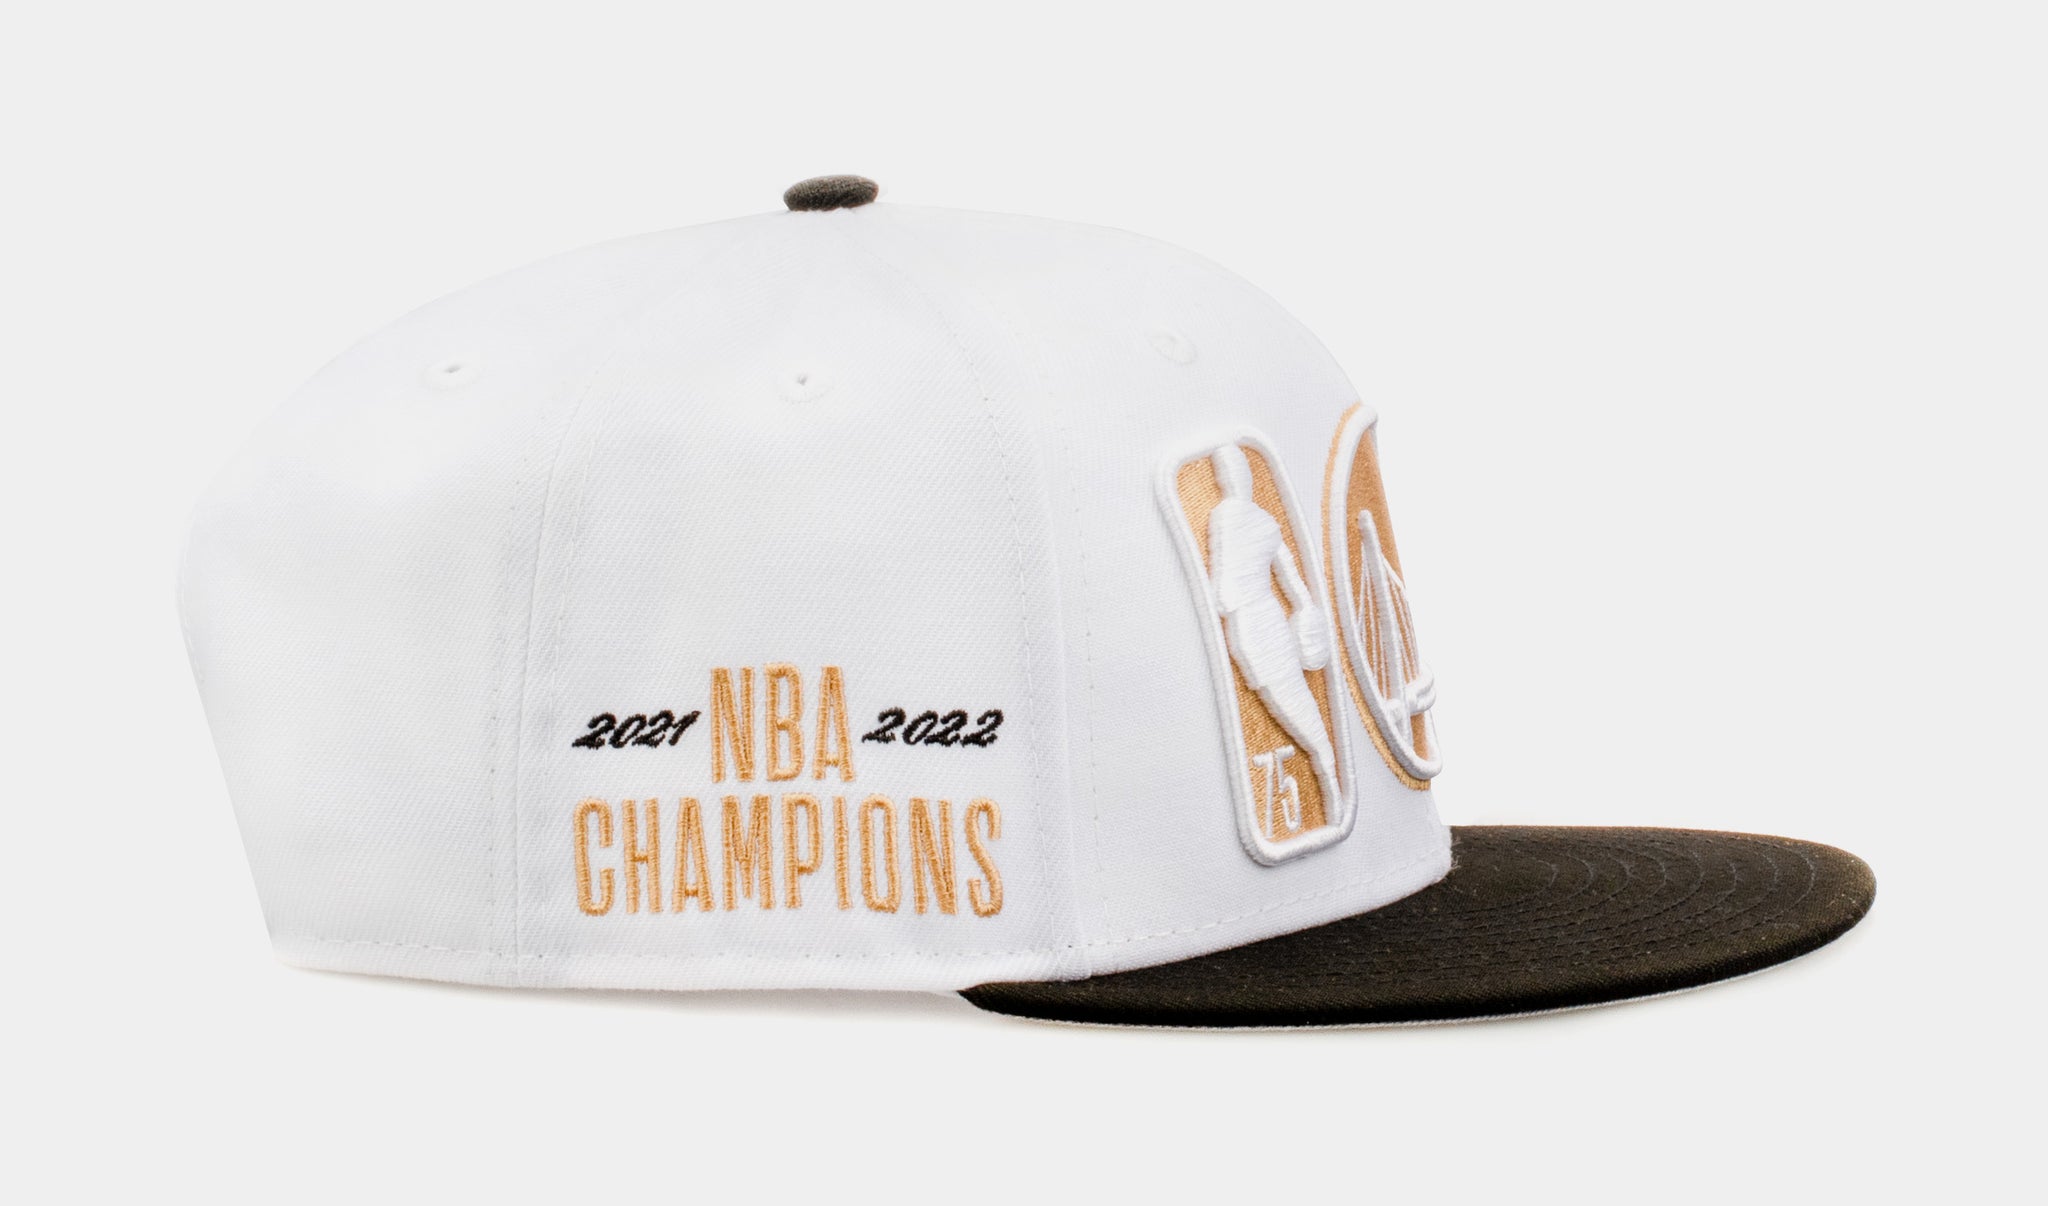 Los Angeles Lakers New Era City Edition 2.0 9FIFTY Snapback Hat - White/Light  Blue